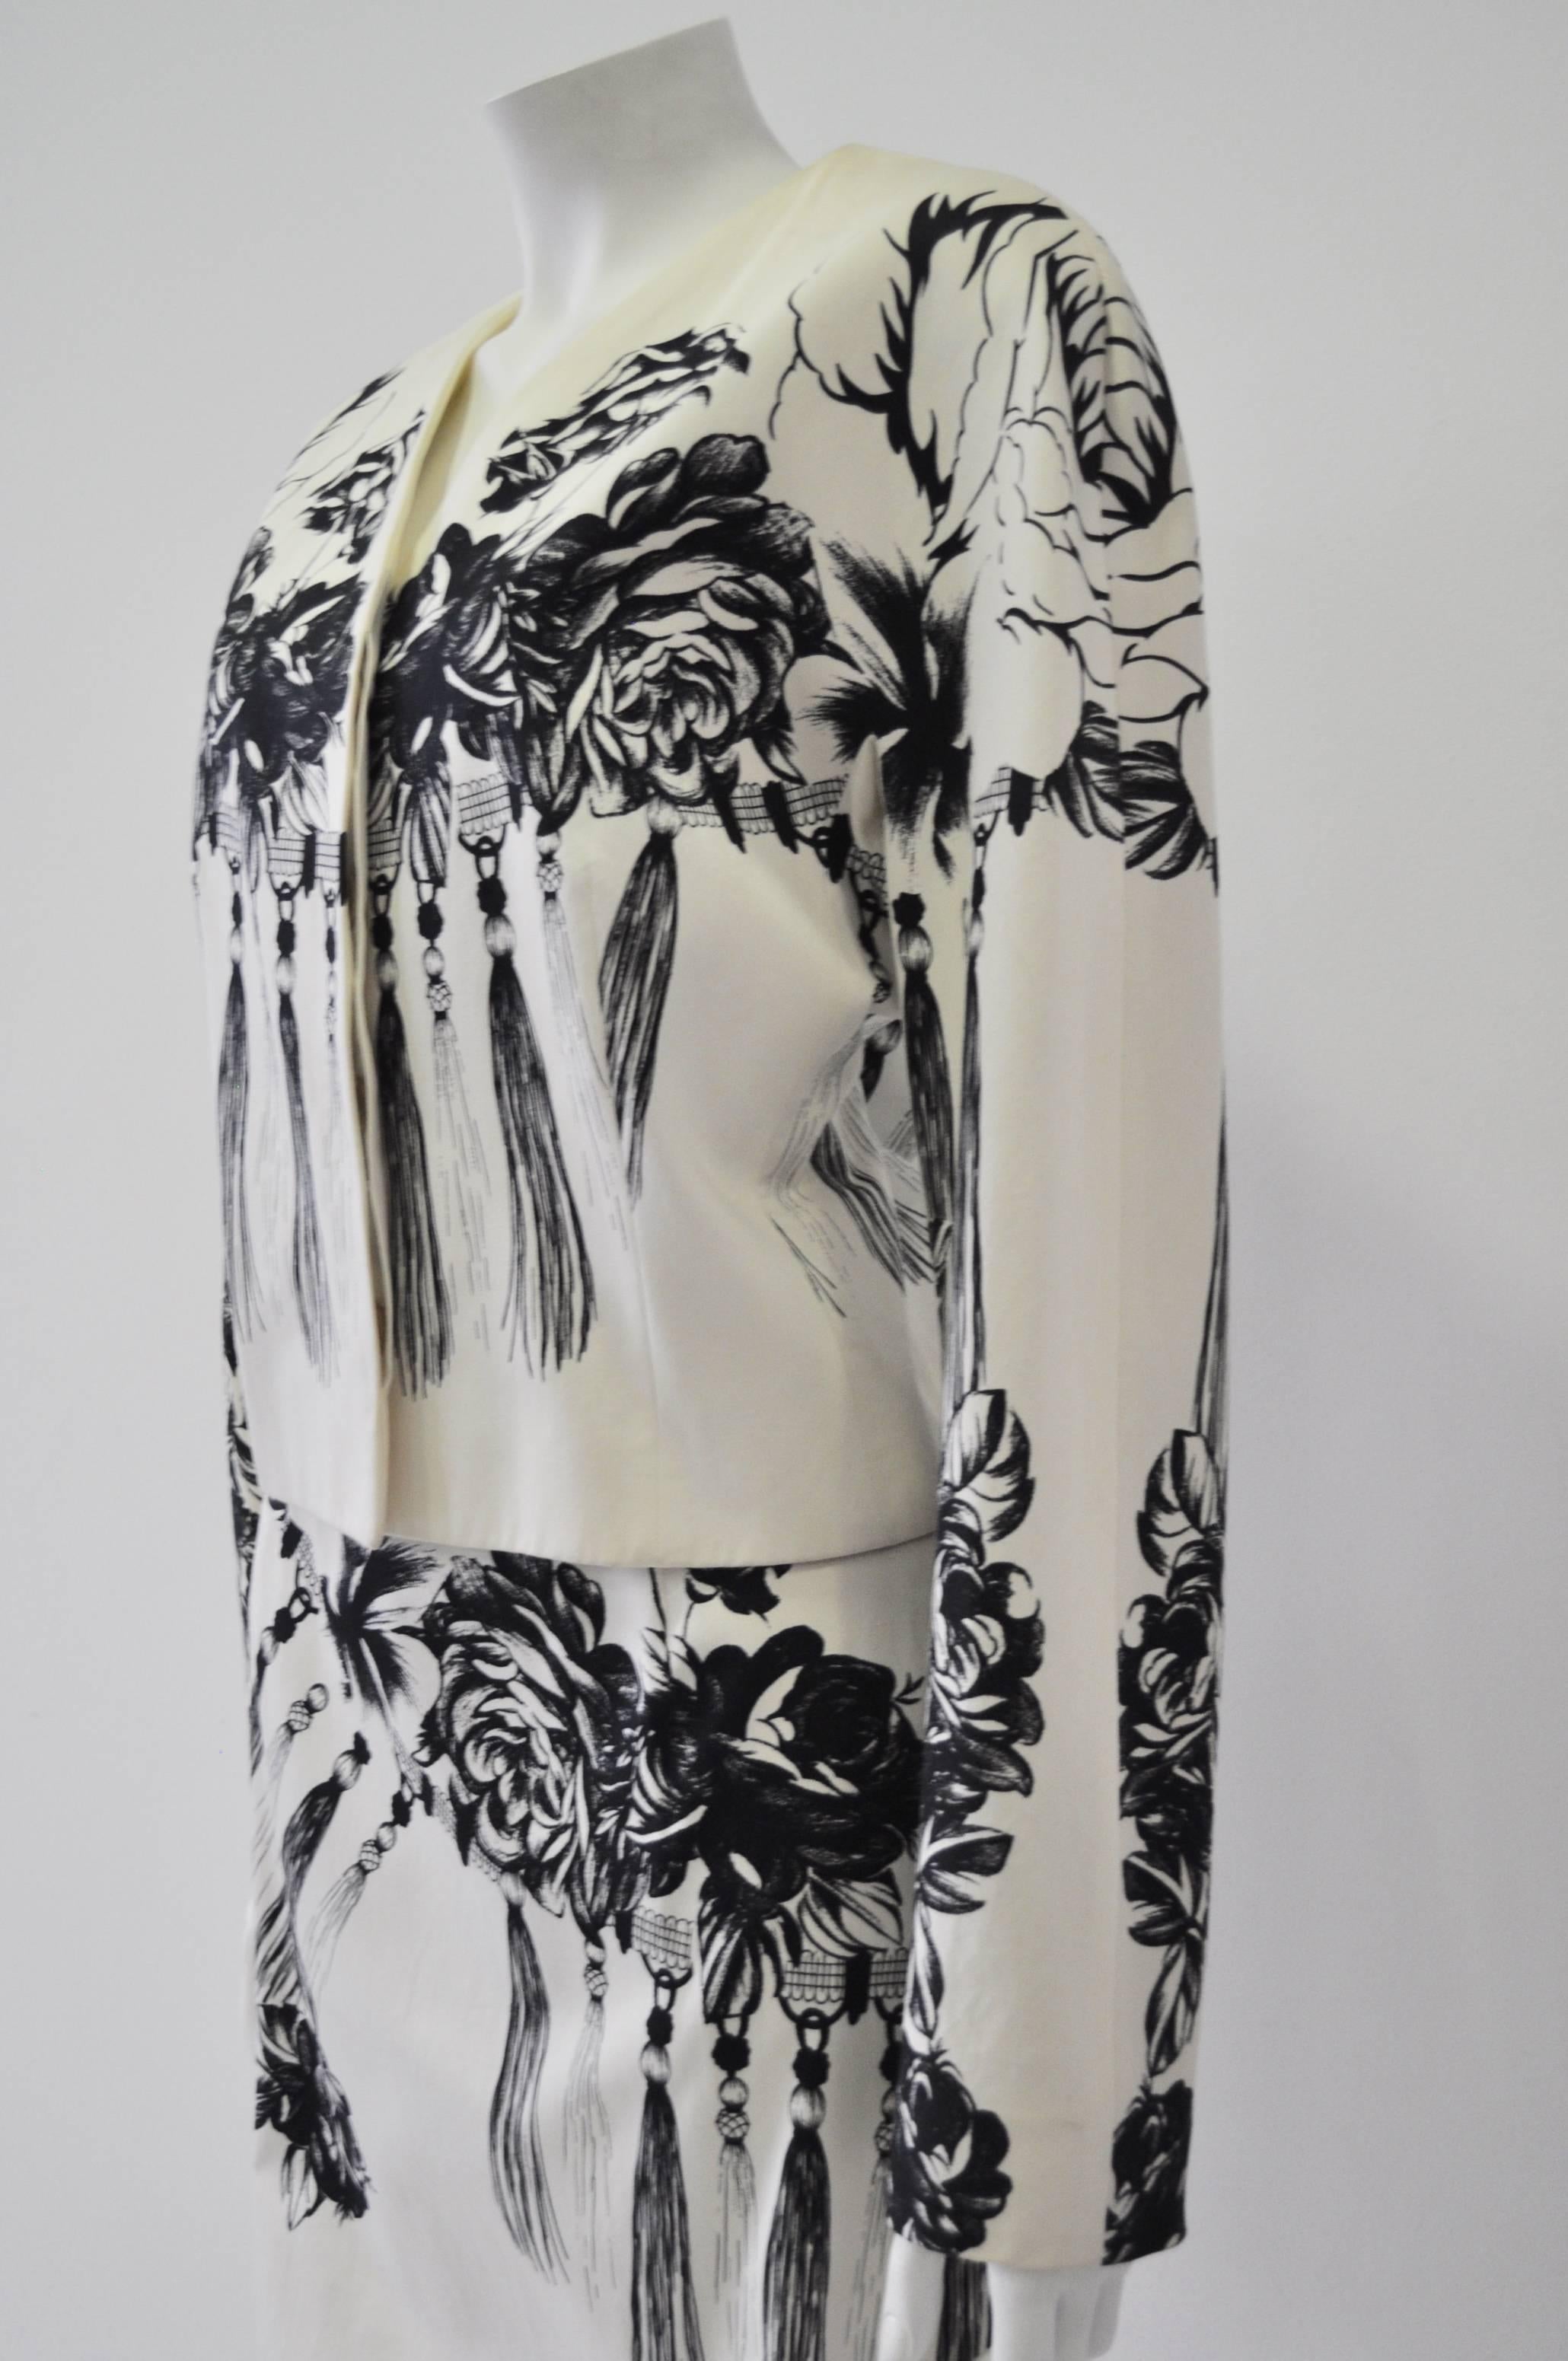 Stunning Gianni Versace Tasseled Roses Print Cotton Skirt Suit In New Condition For Sale In Athens, Agia Paraskevi